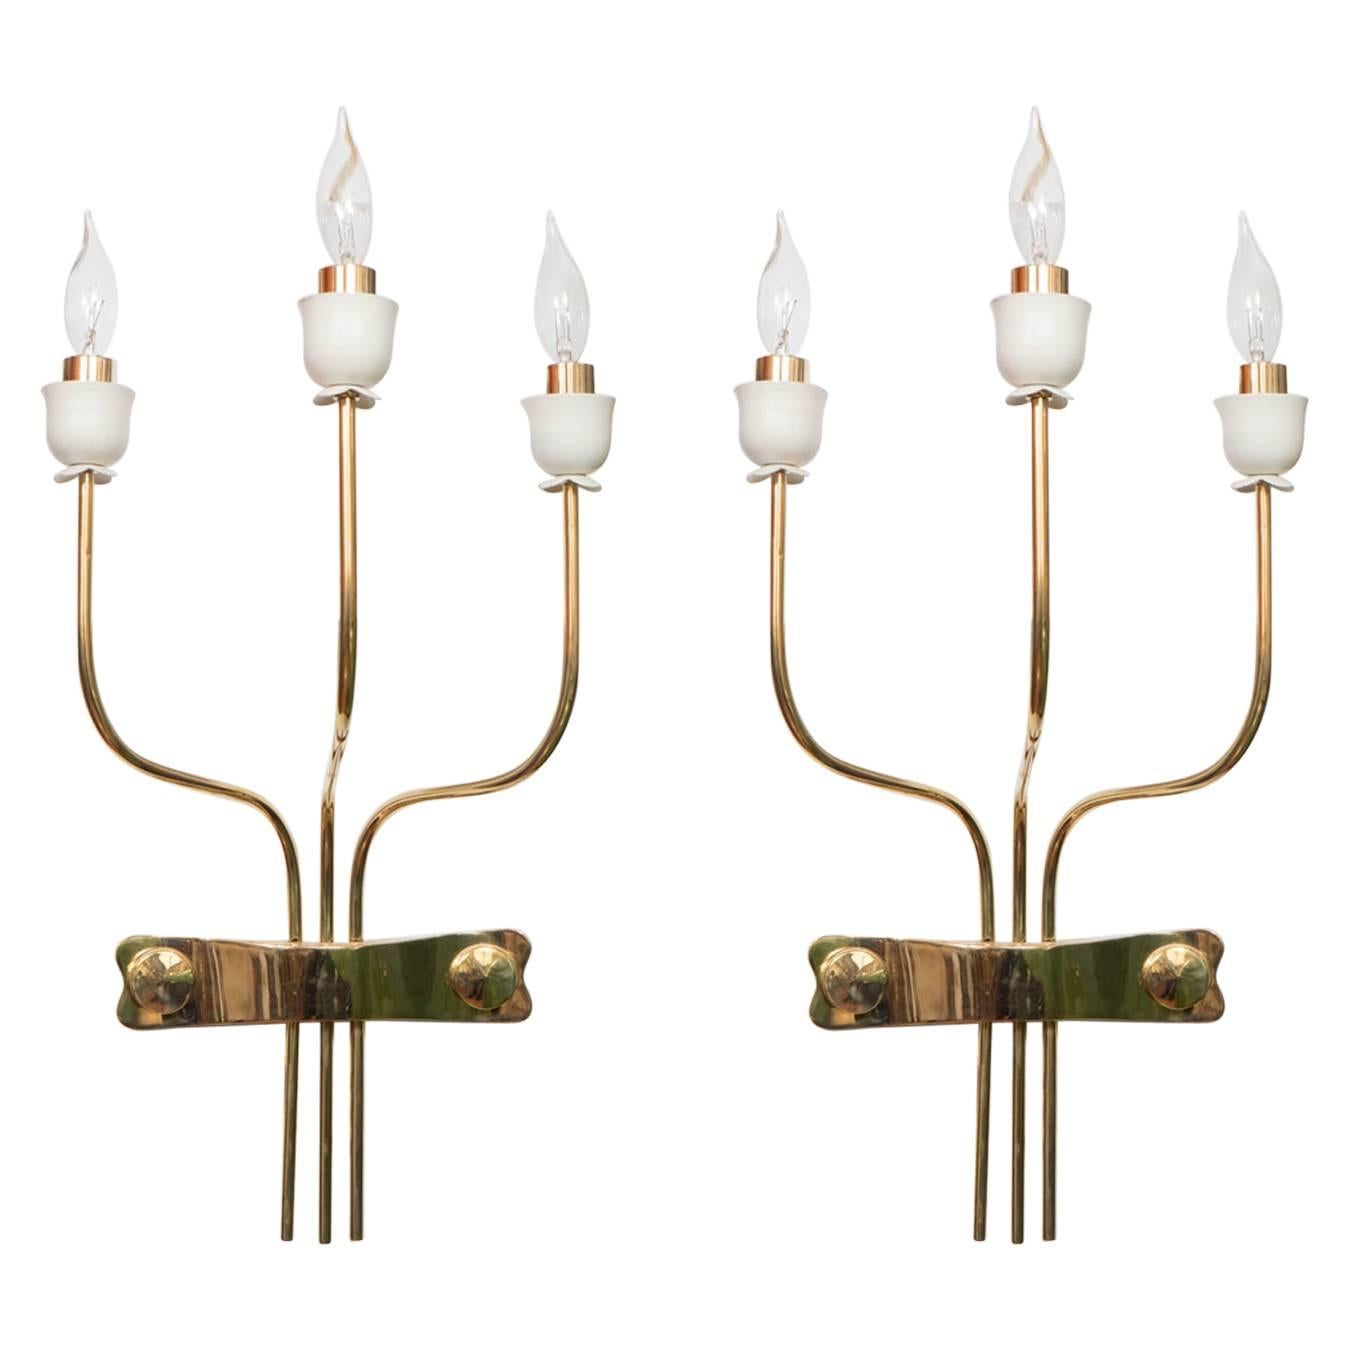 Pair of Three-Arm Brass Sconces with Flower Bobeches